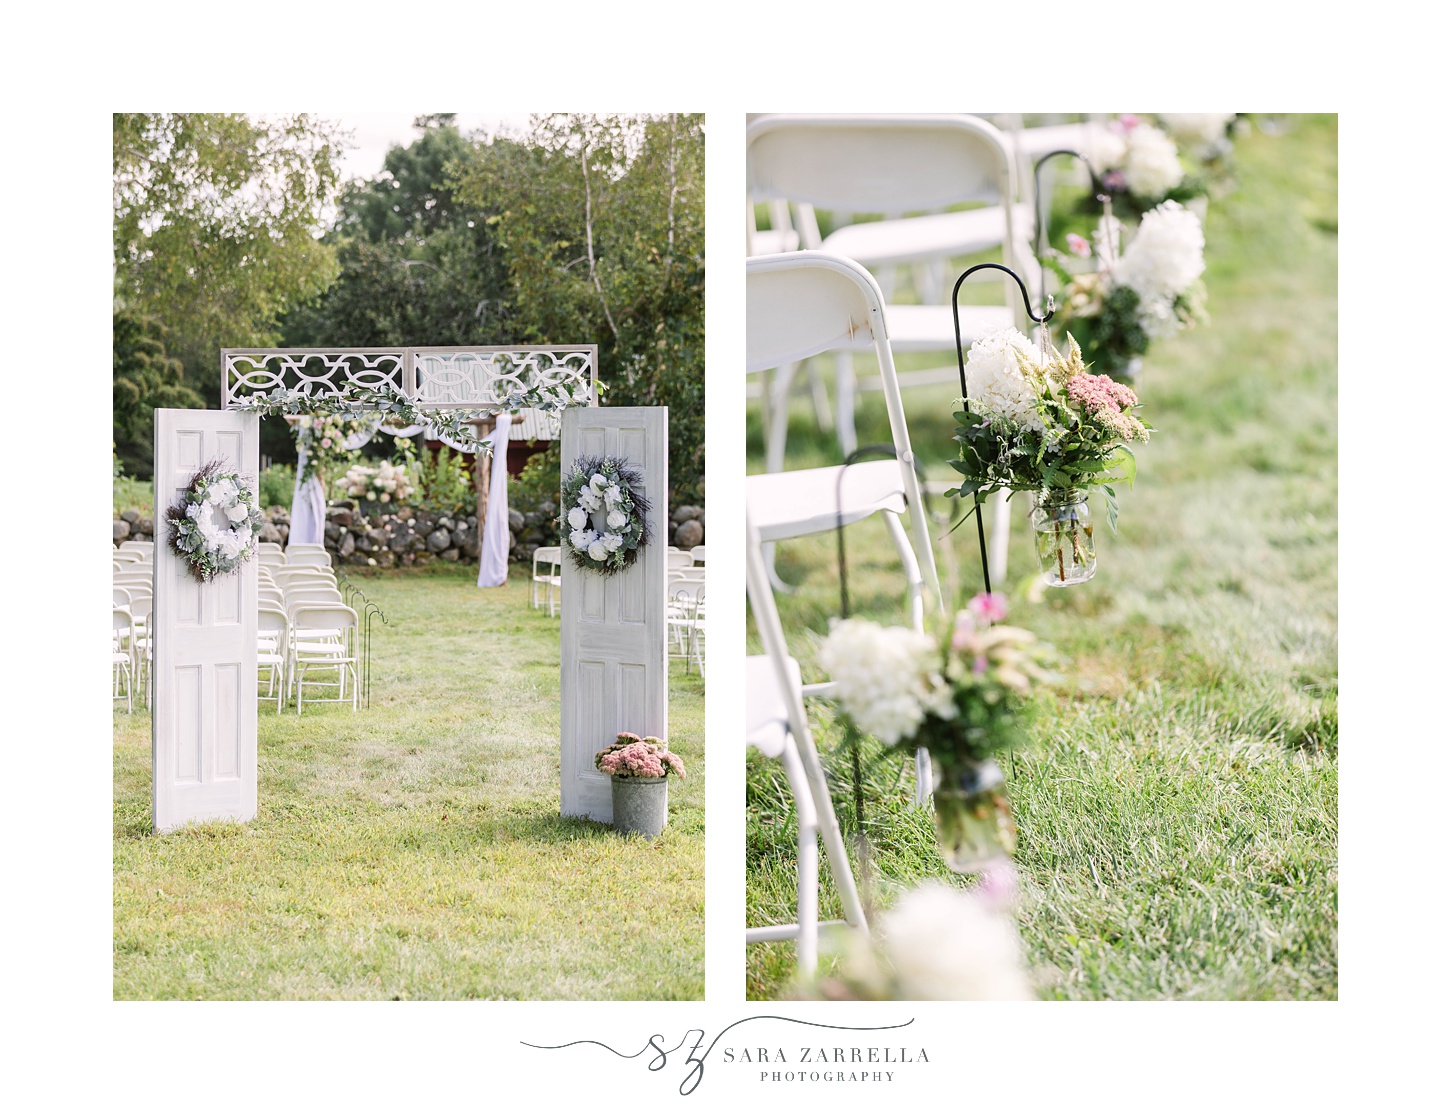 floral details and seats for whimsical garden wedding on Rhode Island farm